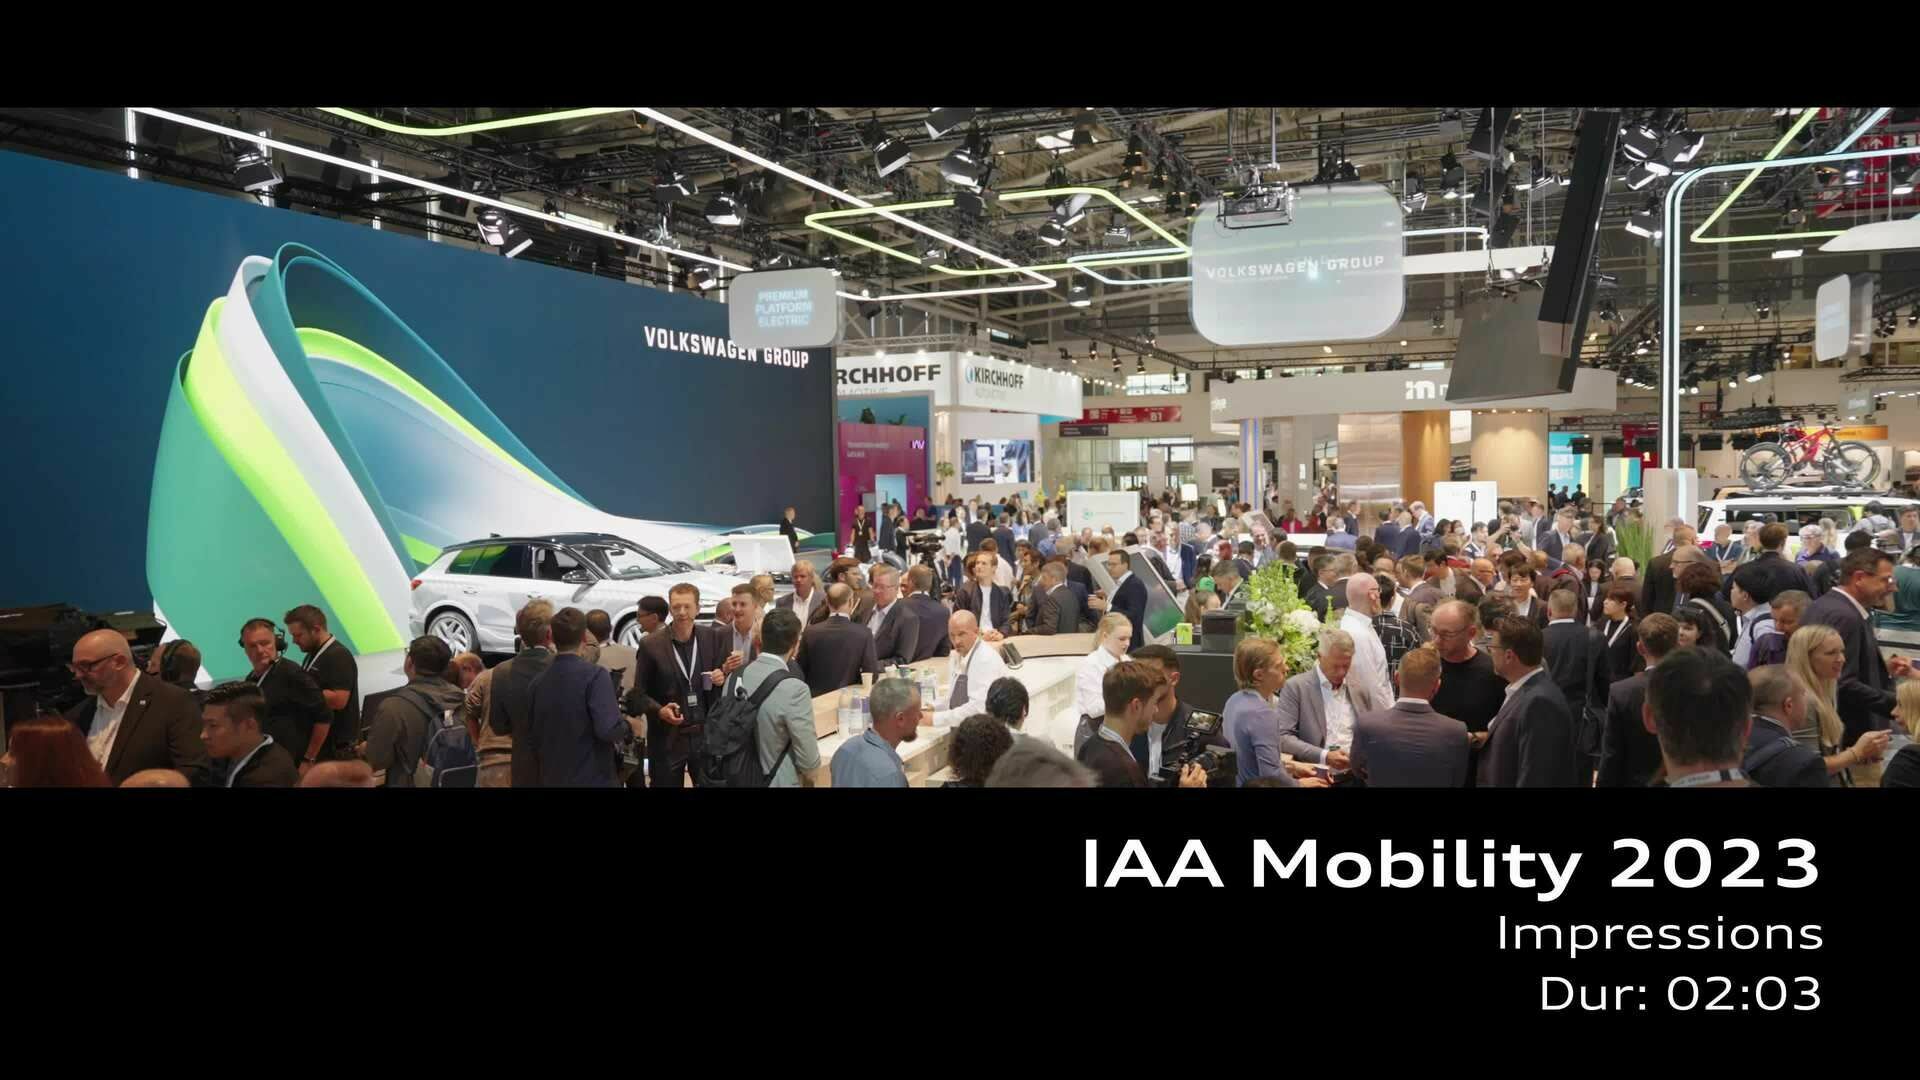 IAA Mobility München 2023 impressions – Footage